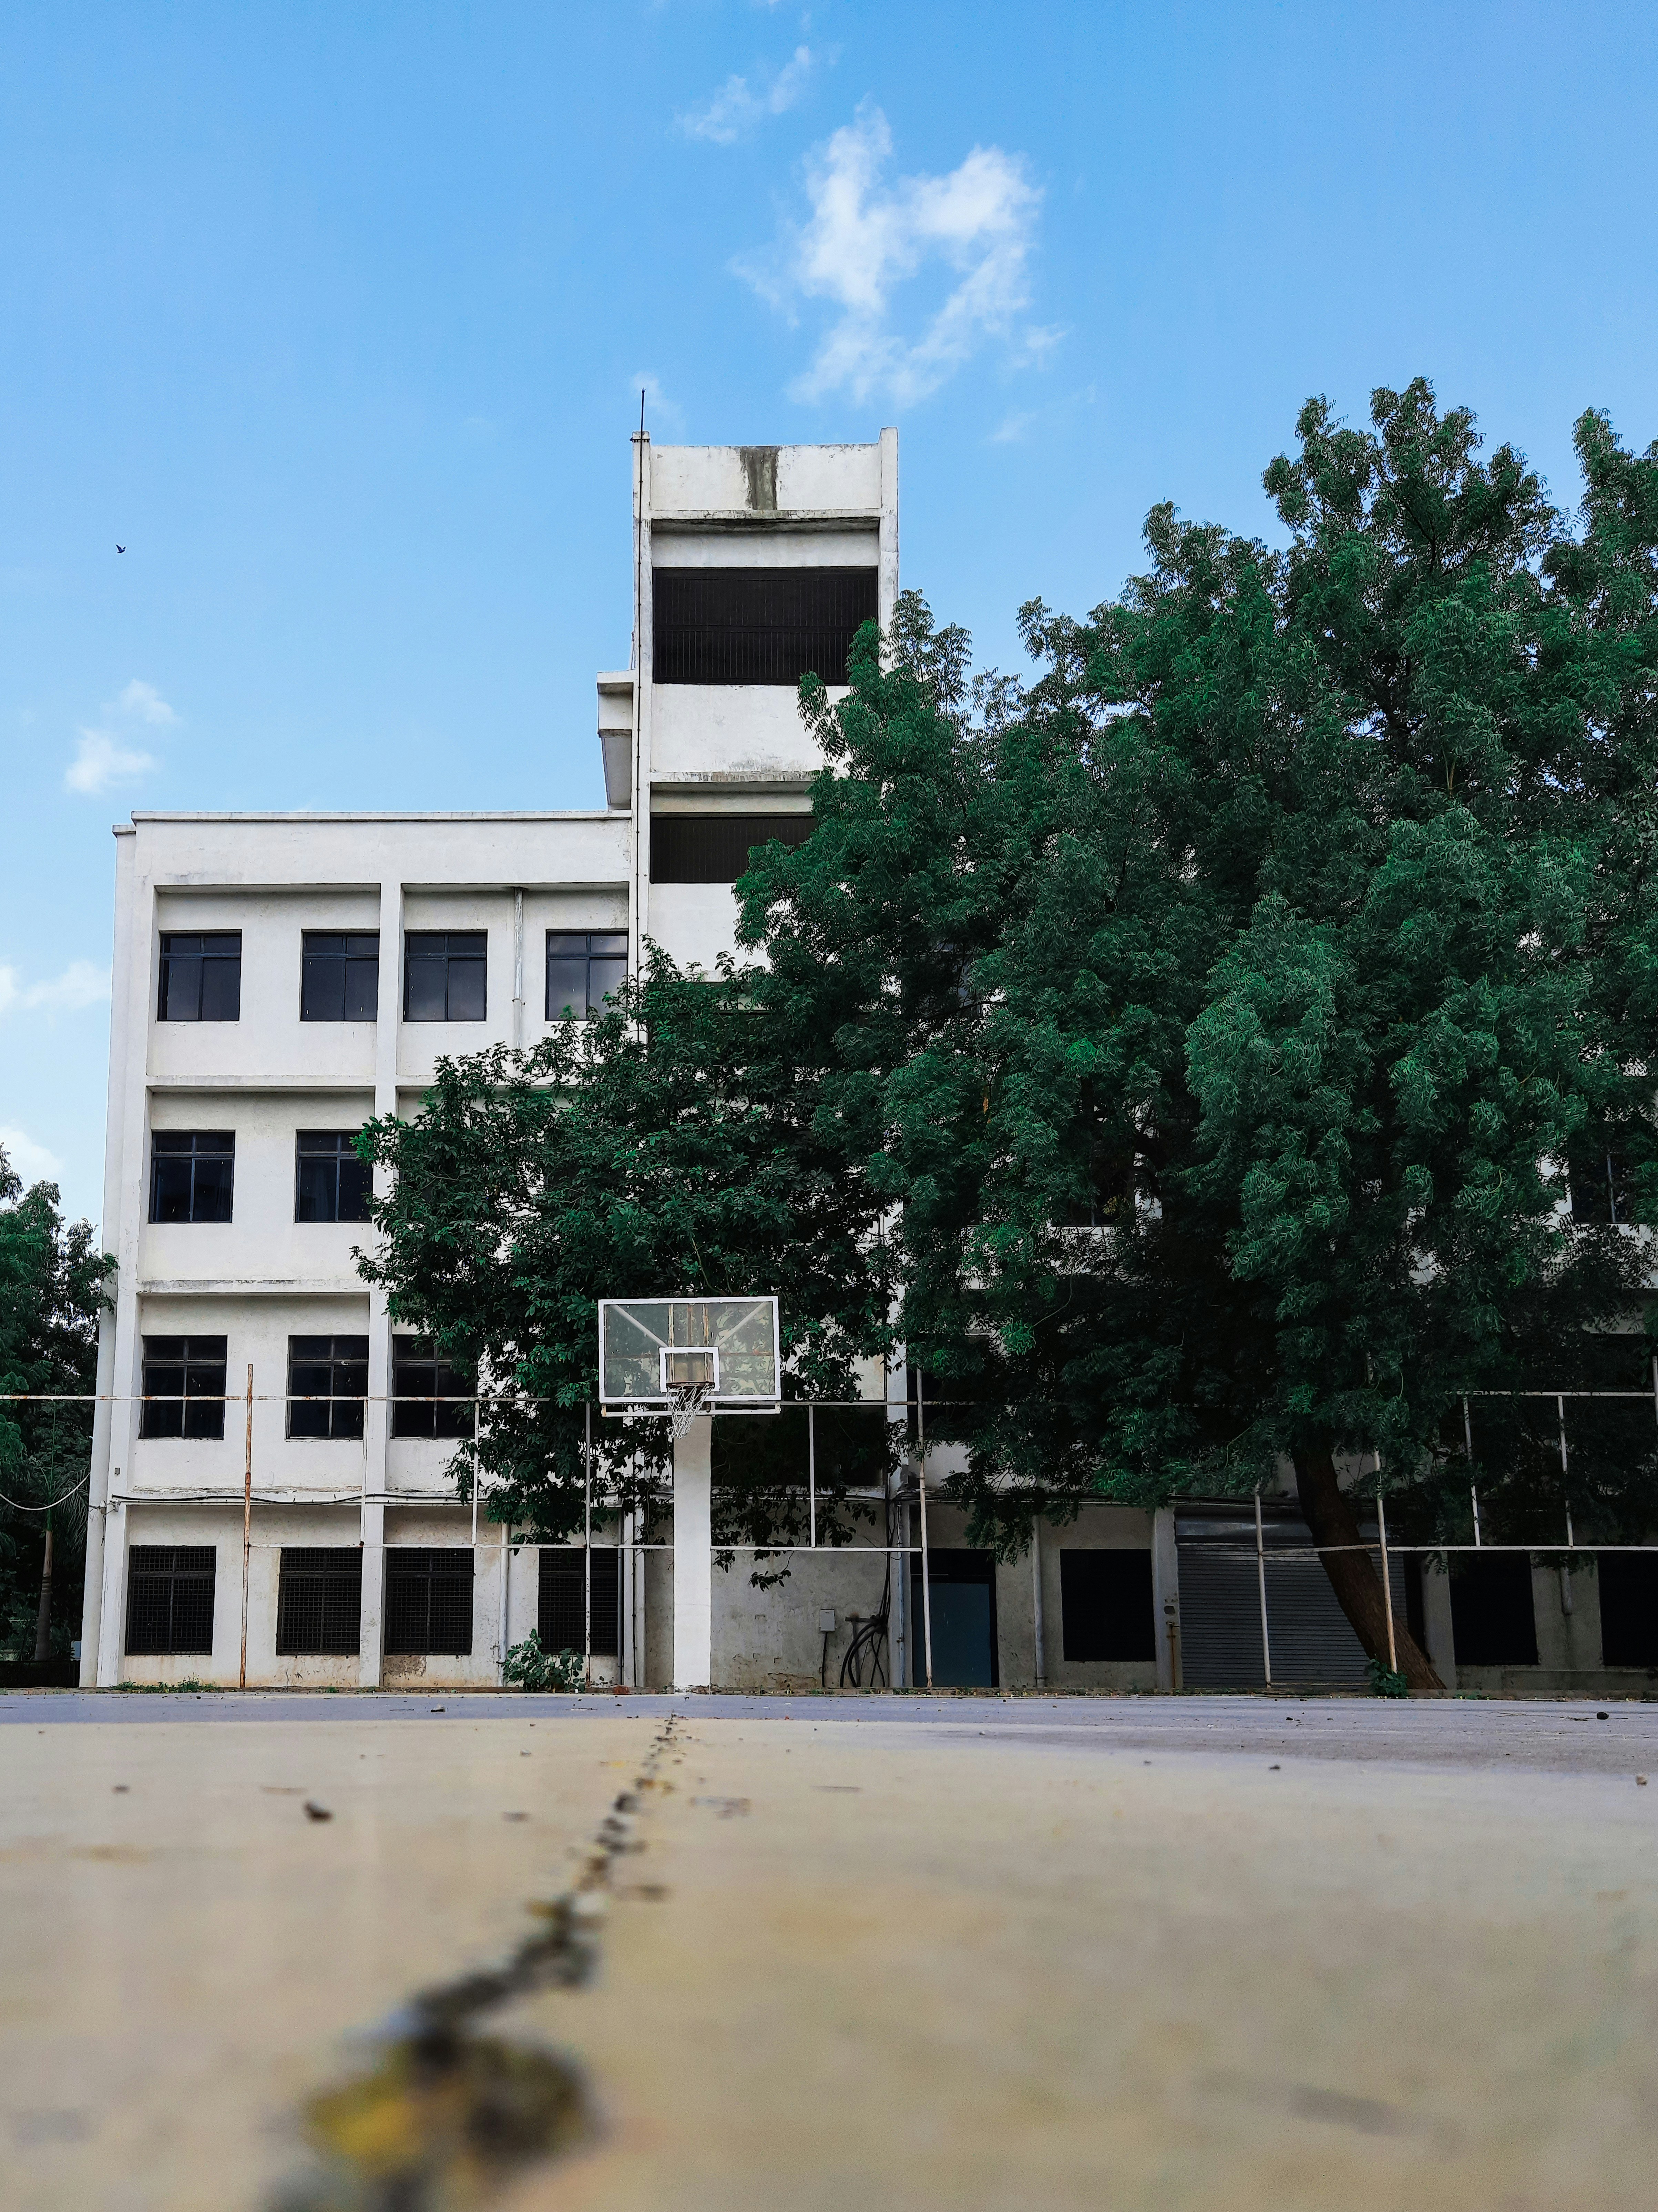 Basketball court of LJ campus